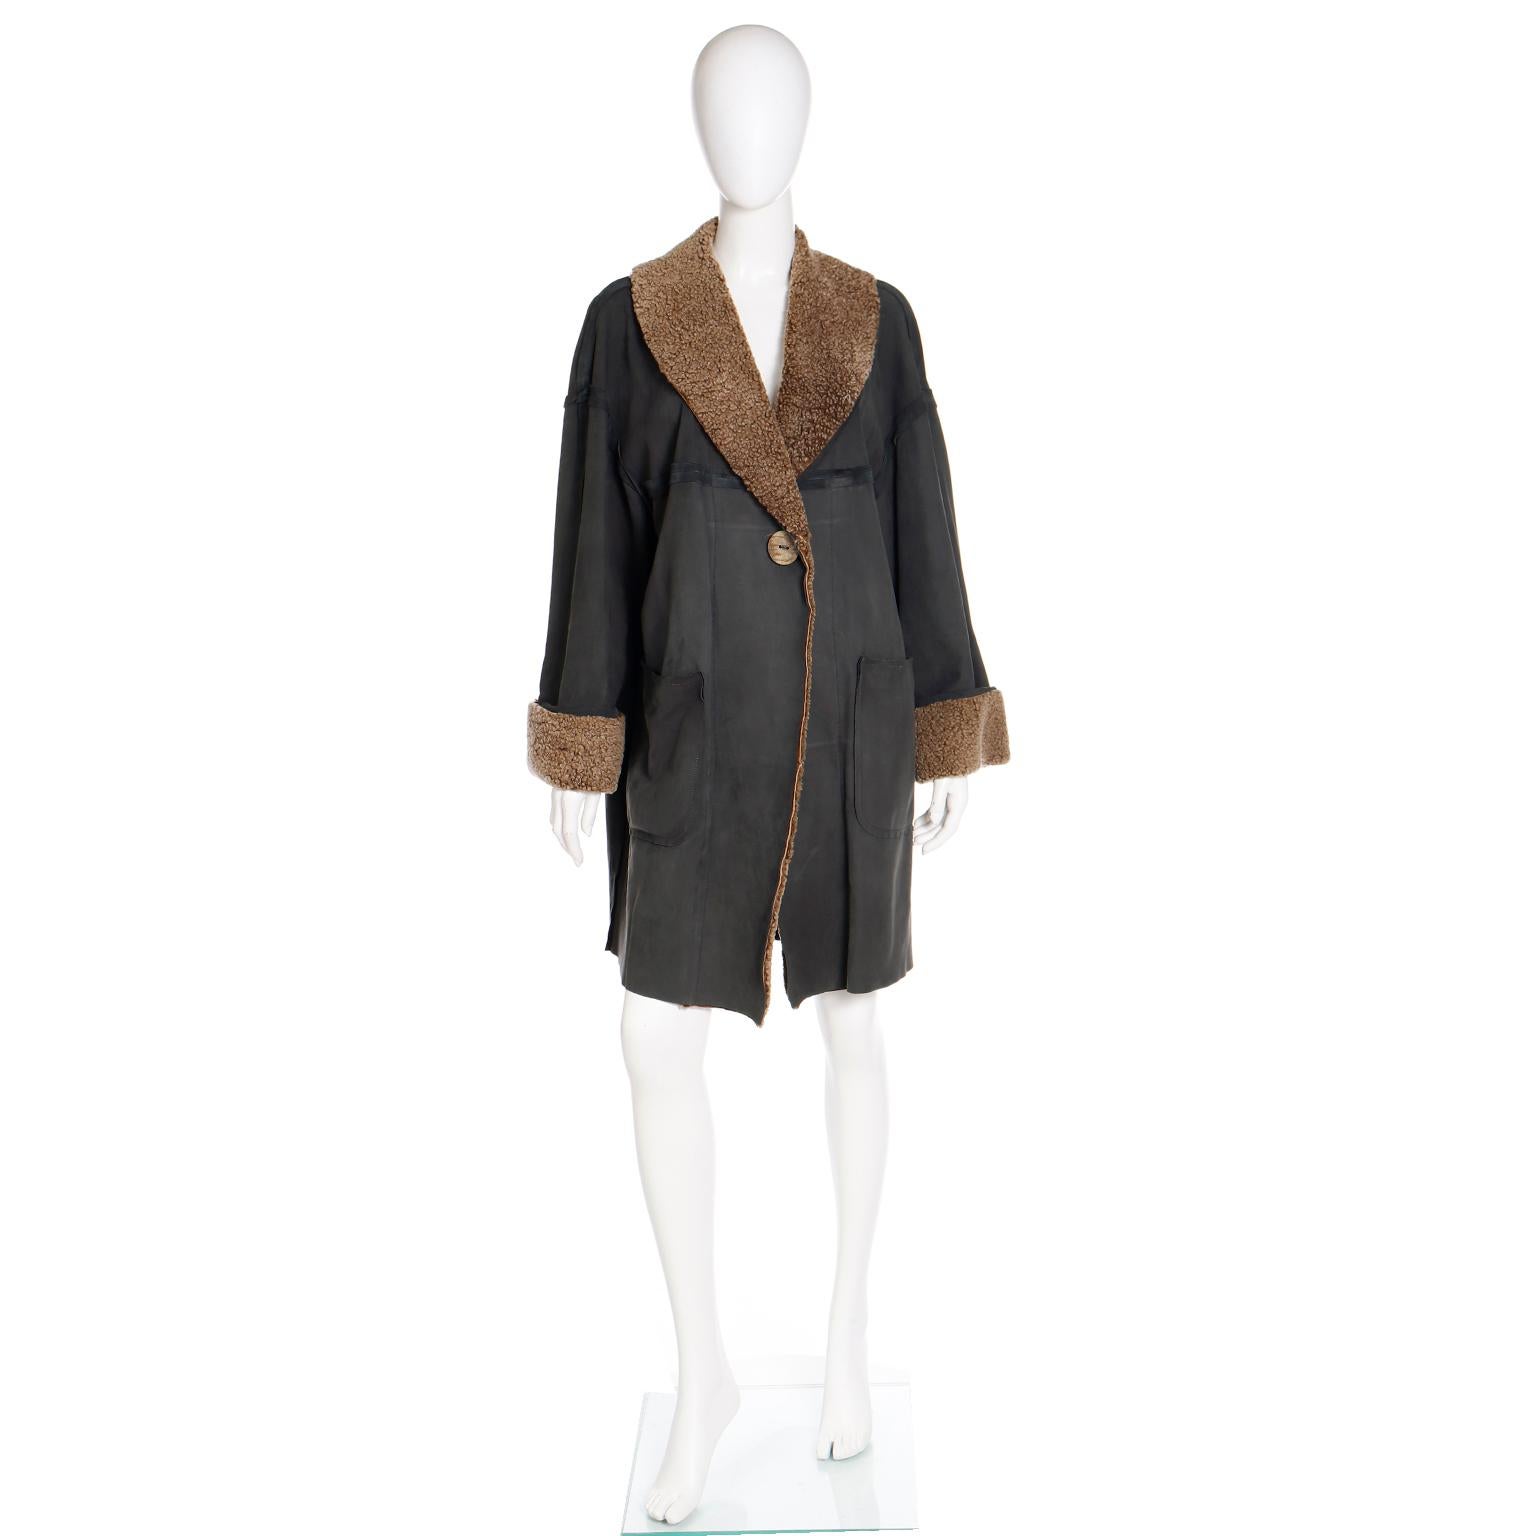 This is a super easy to wear vintage Fendi grey green shearling jacket with lambswool trim at the collar and cuffs. Unlike most shearling coats, this one is very lightweight and can be worn warmer climates. The jacket has front patch pockets and